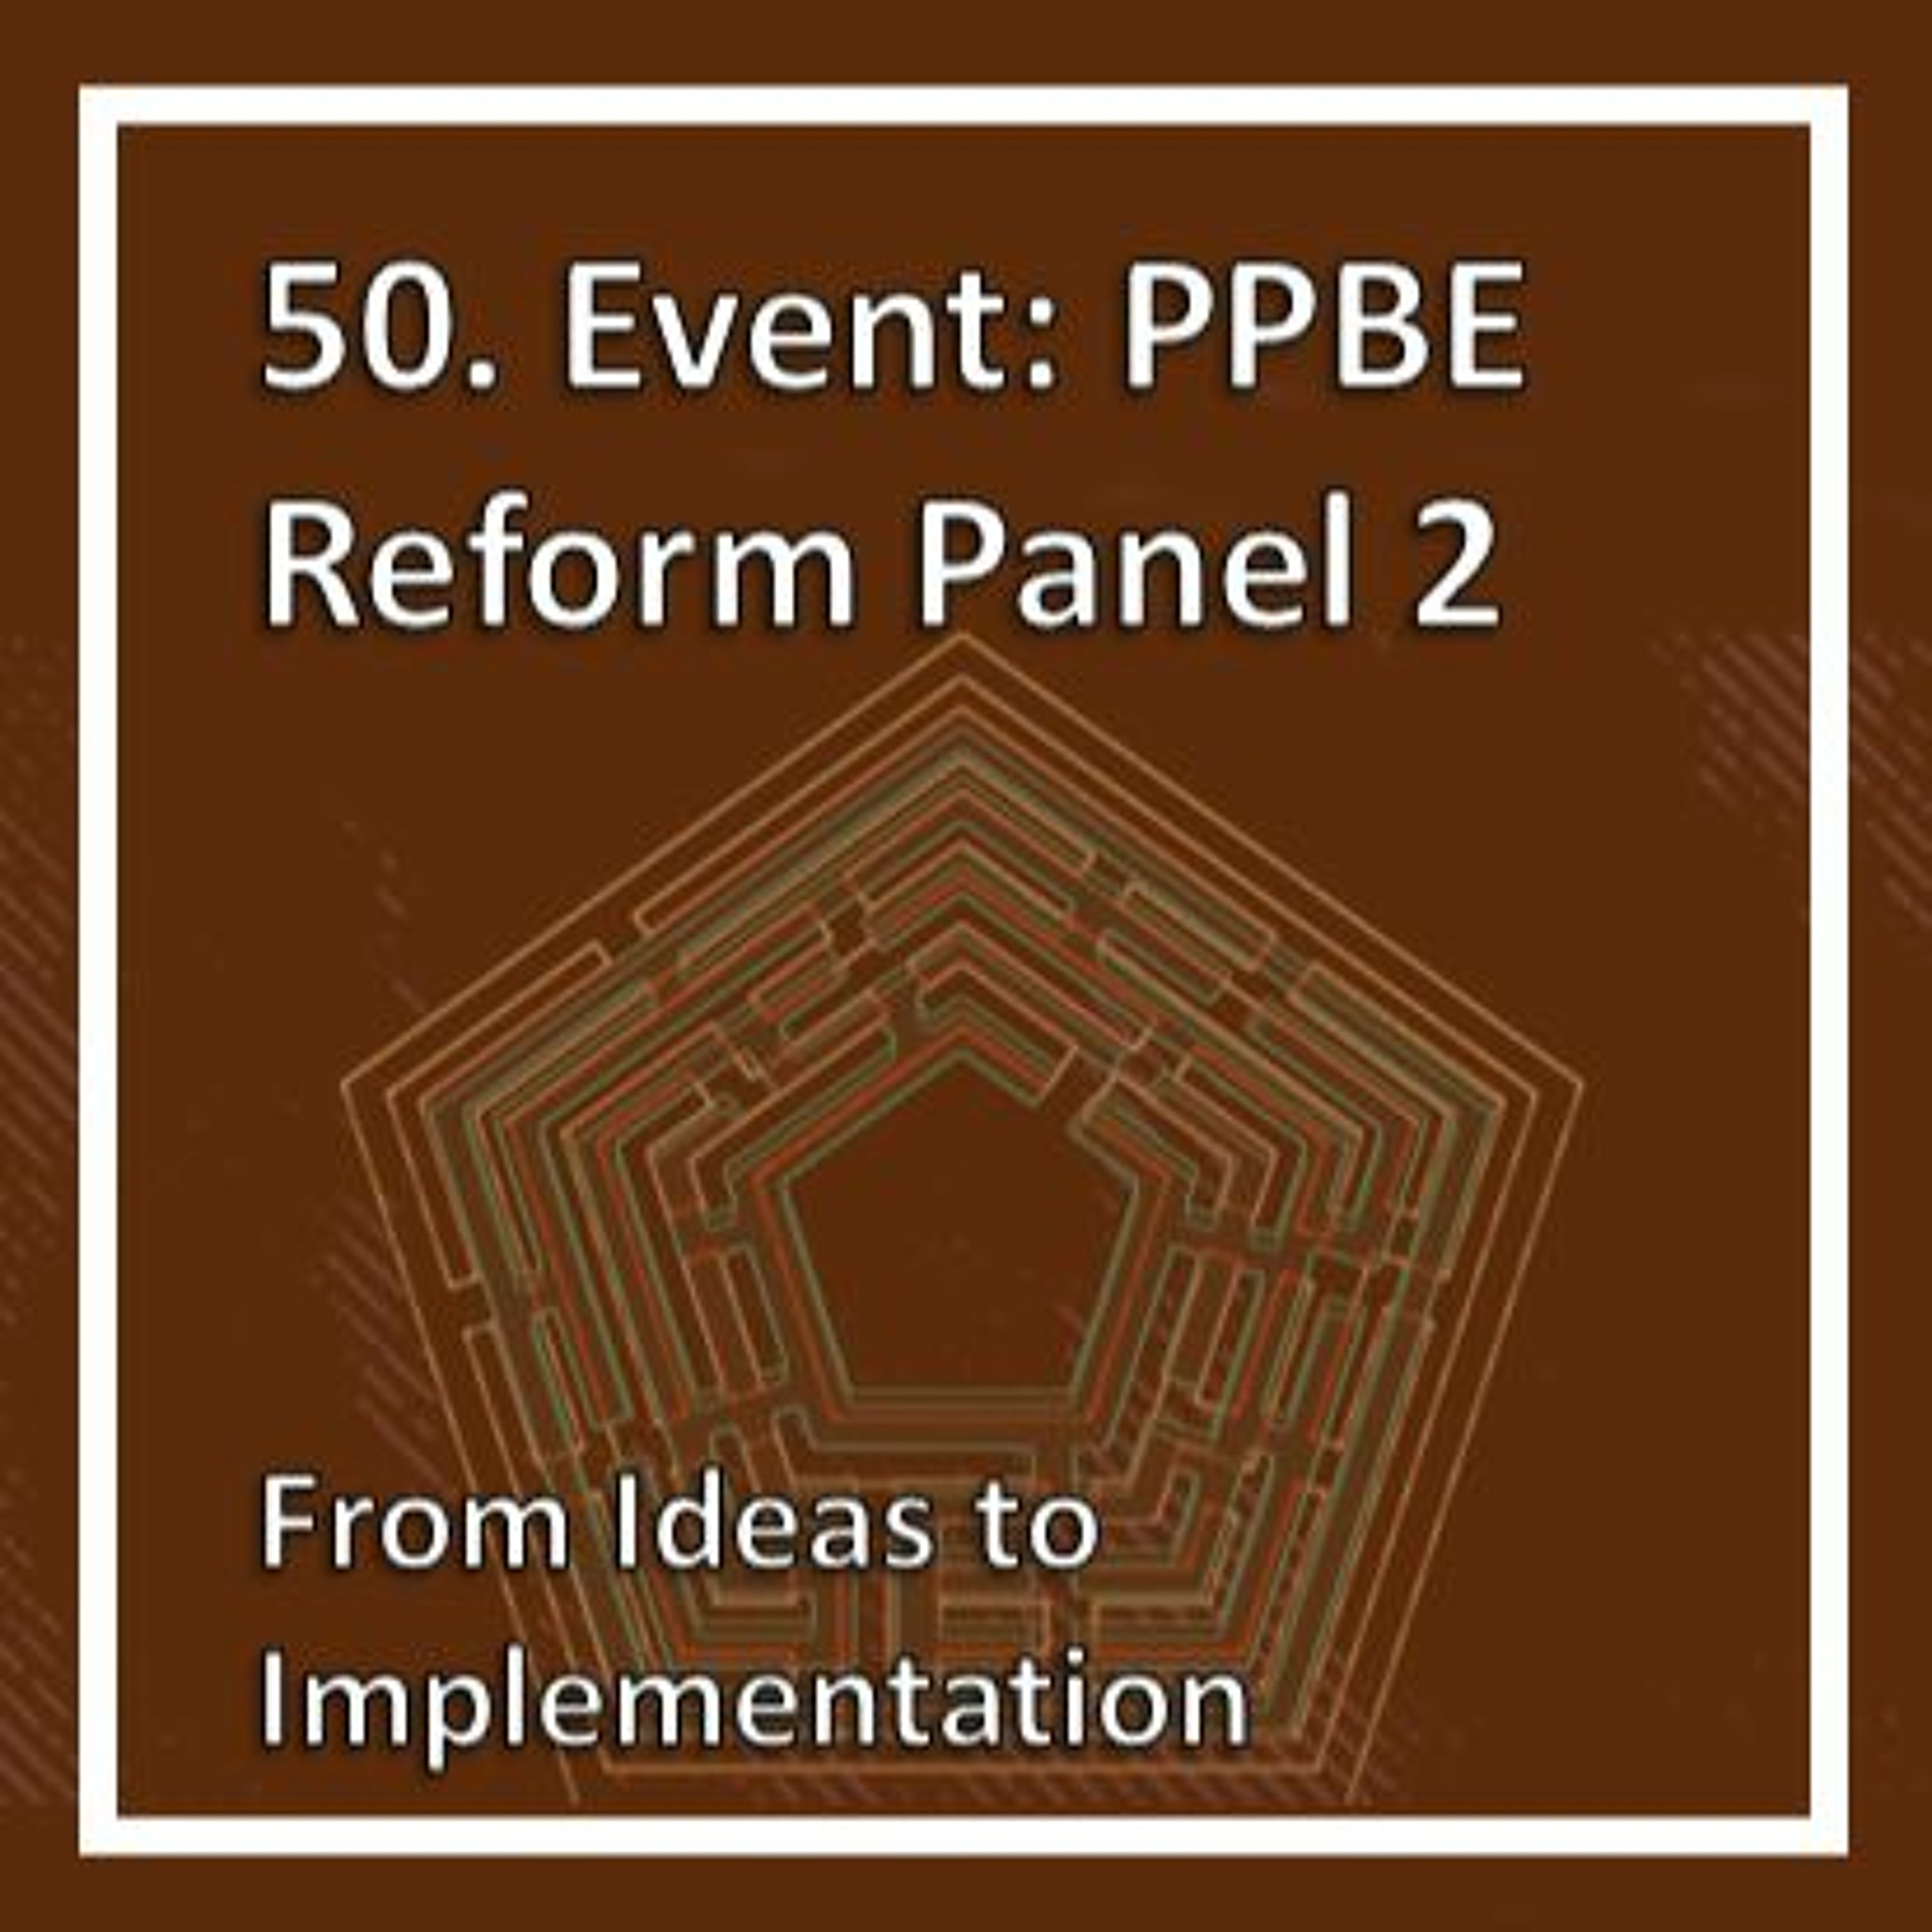 Event: PPBE Reform Panel 2 -- From Ideas to Implementation